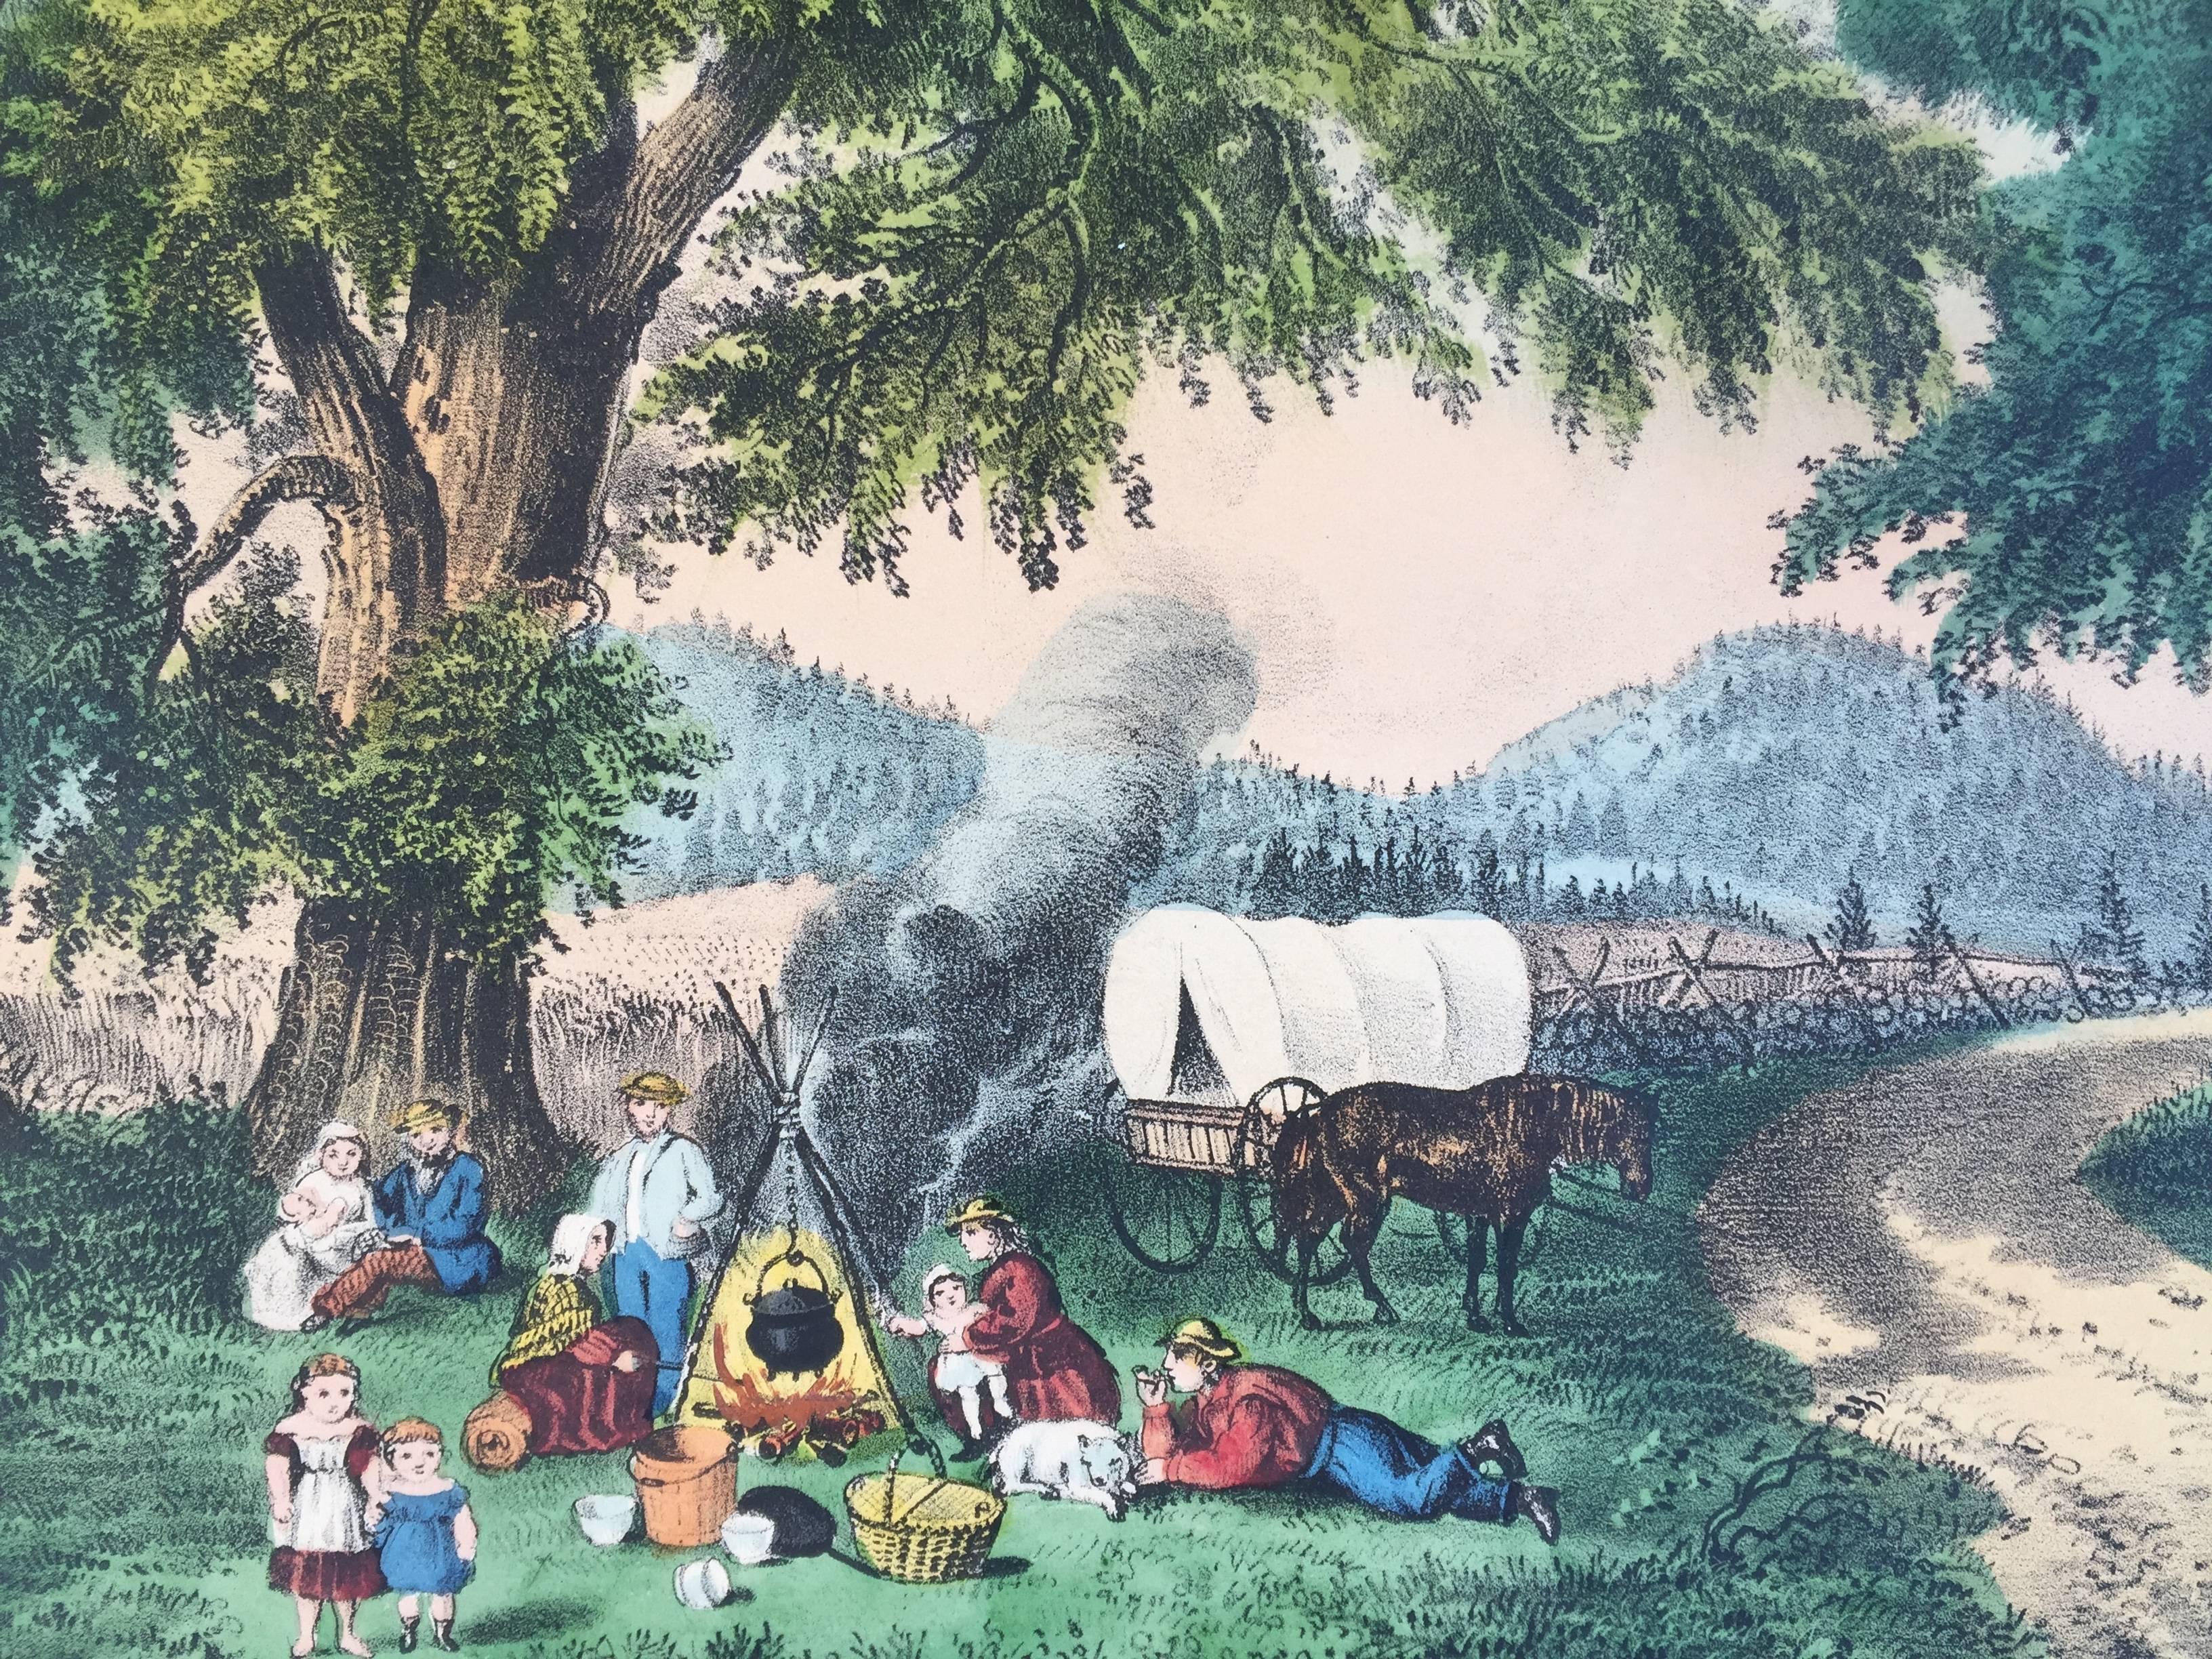 A HALT BY THE WAYSIDE - Print by Currier & Ives